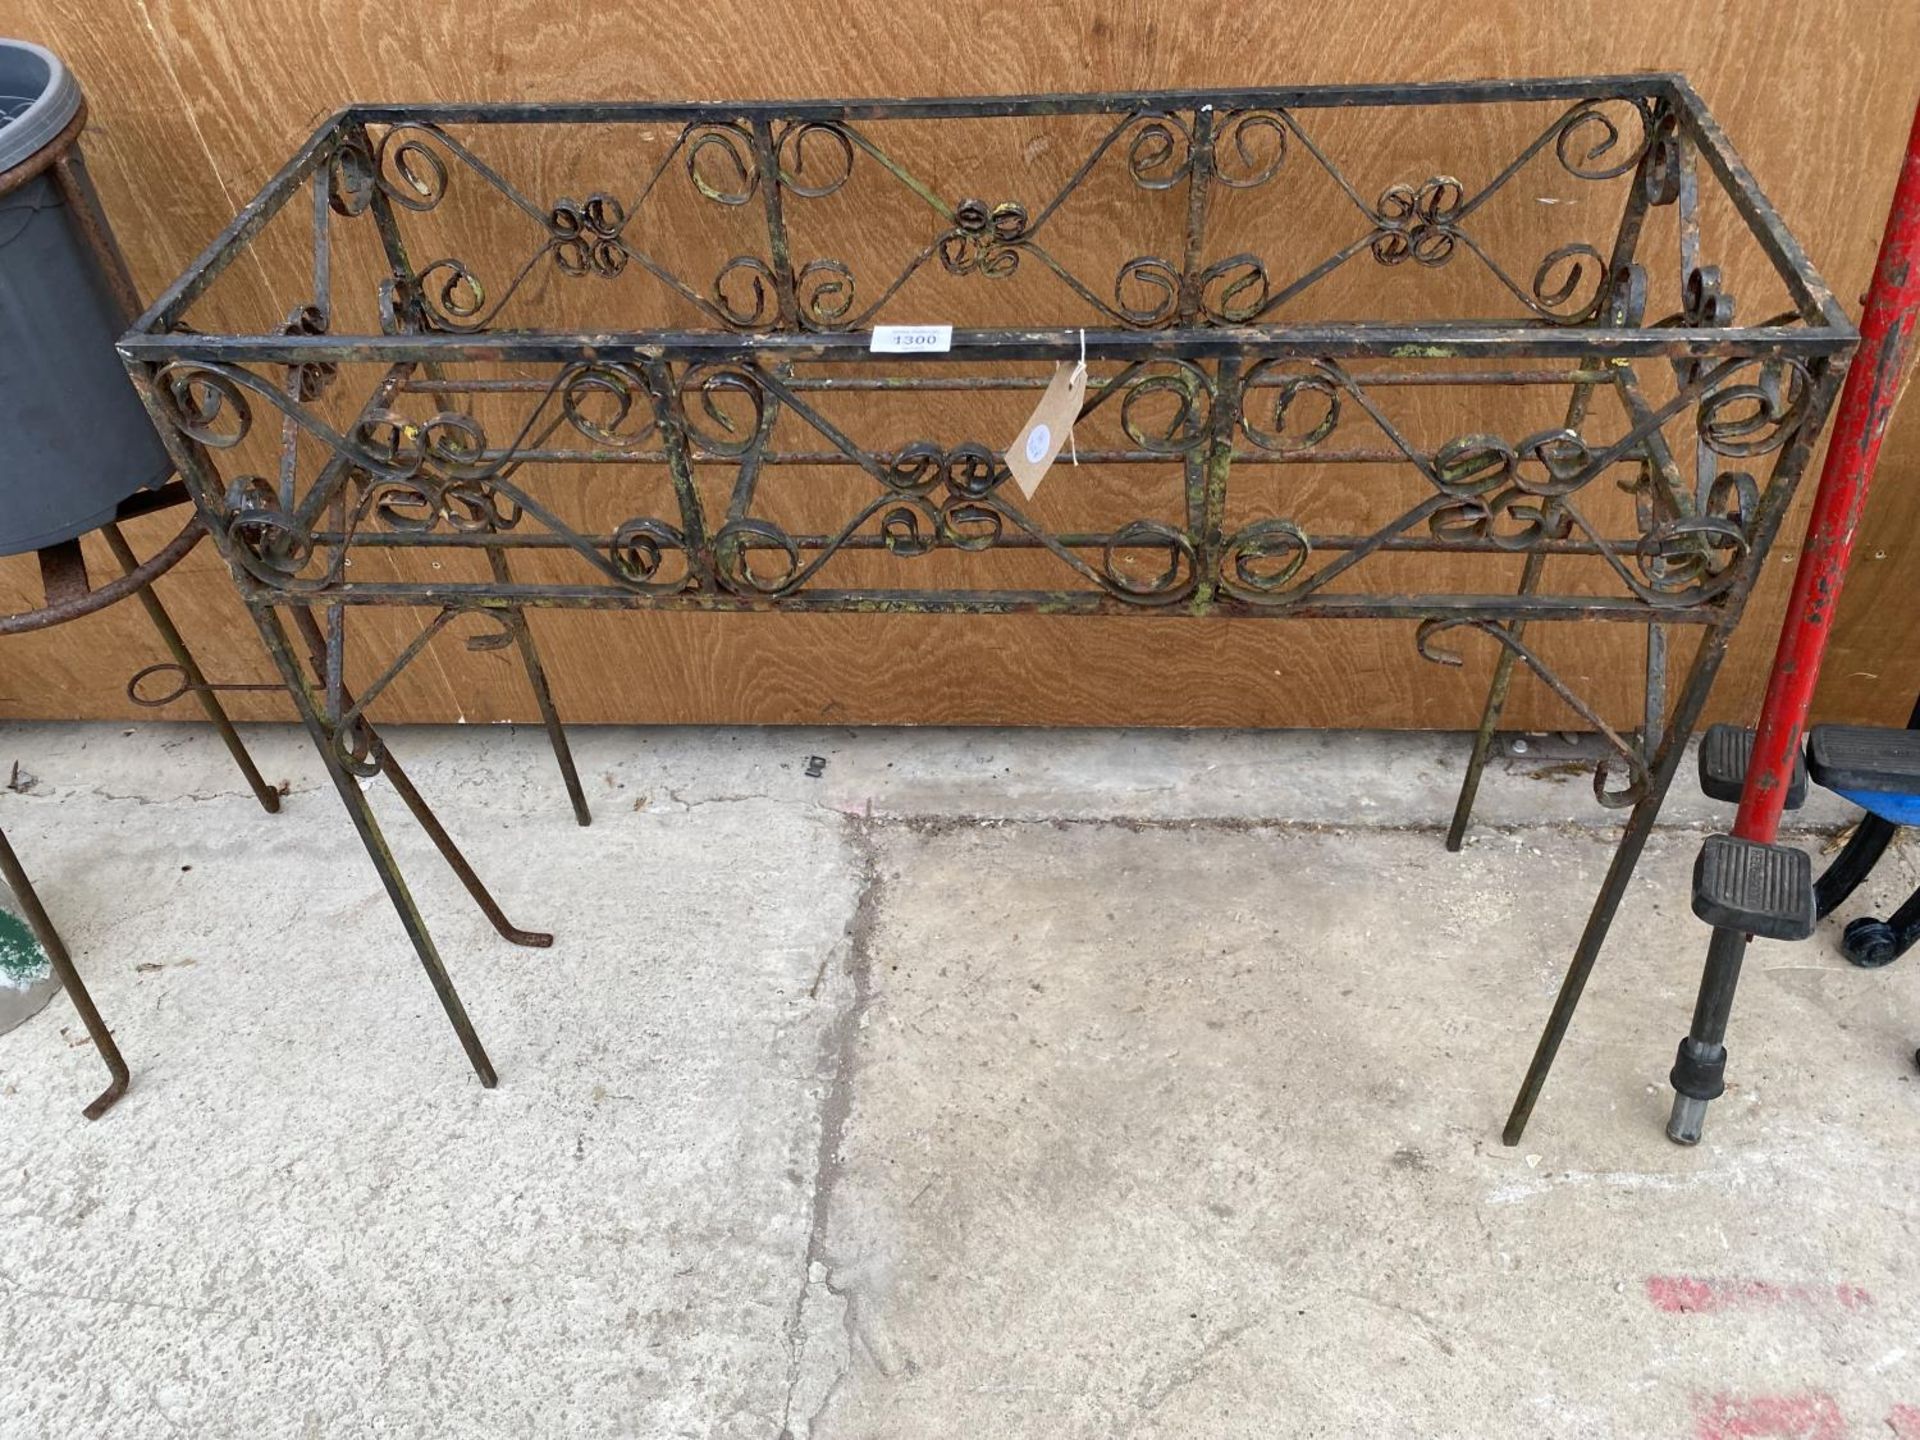 A DECORATIVE WROUGHT IRON PLANT STAND - Image 3 of 6